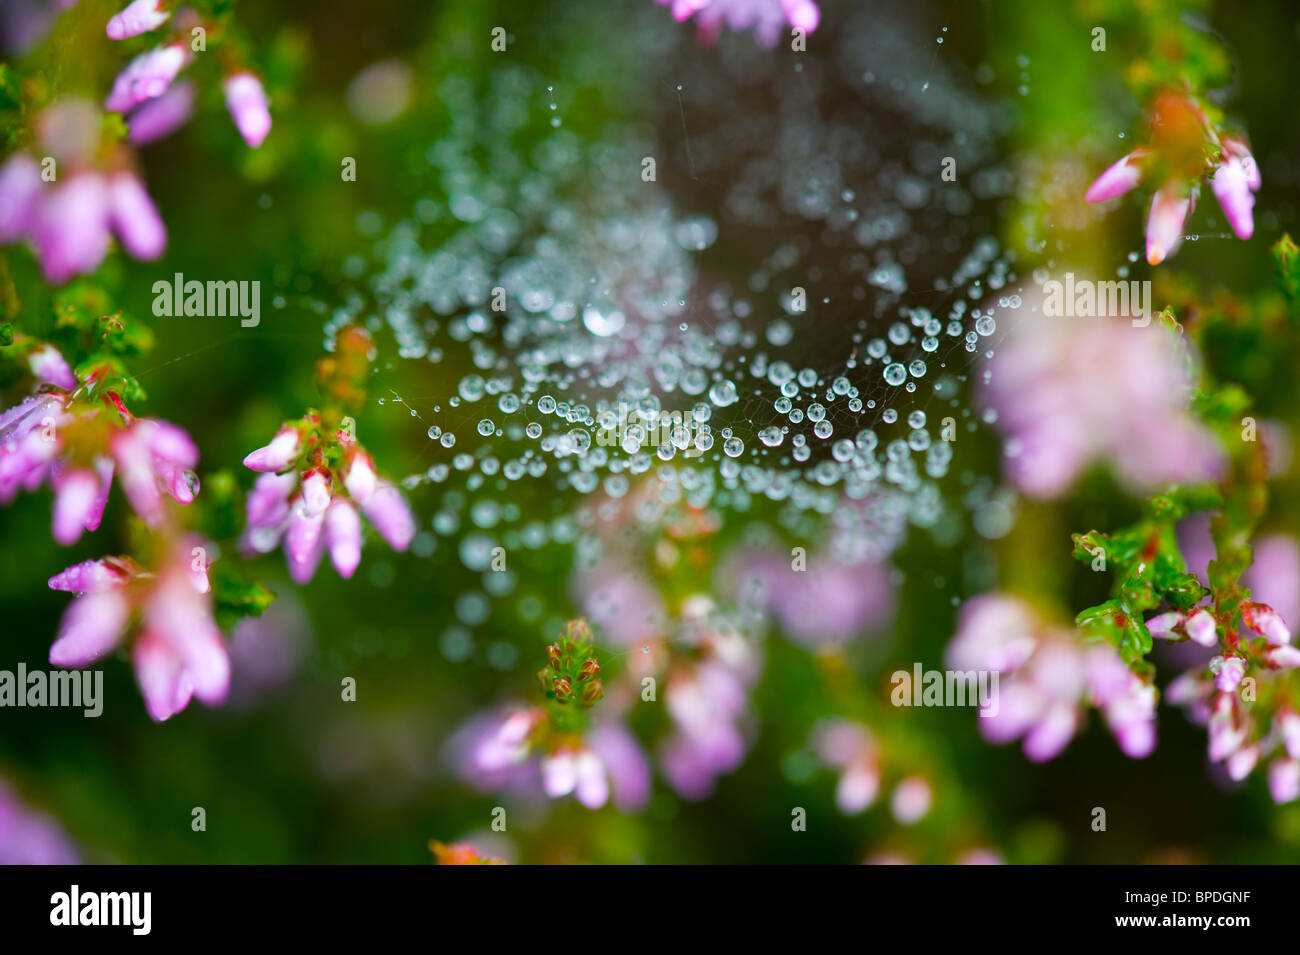 Water on a web surrounded by heather Stock Photo